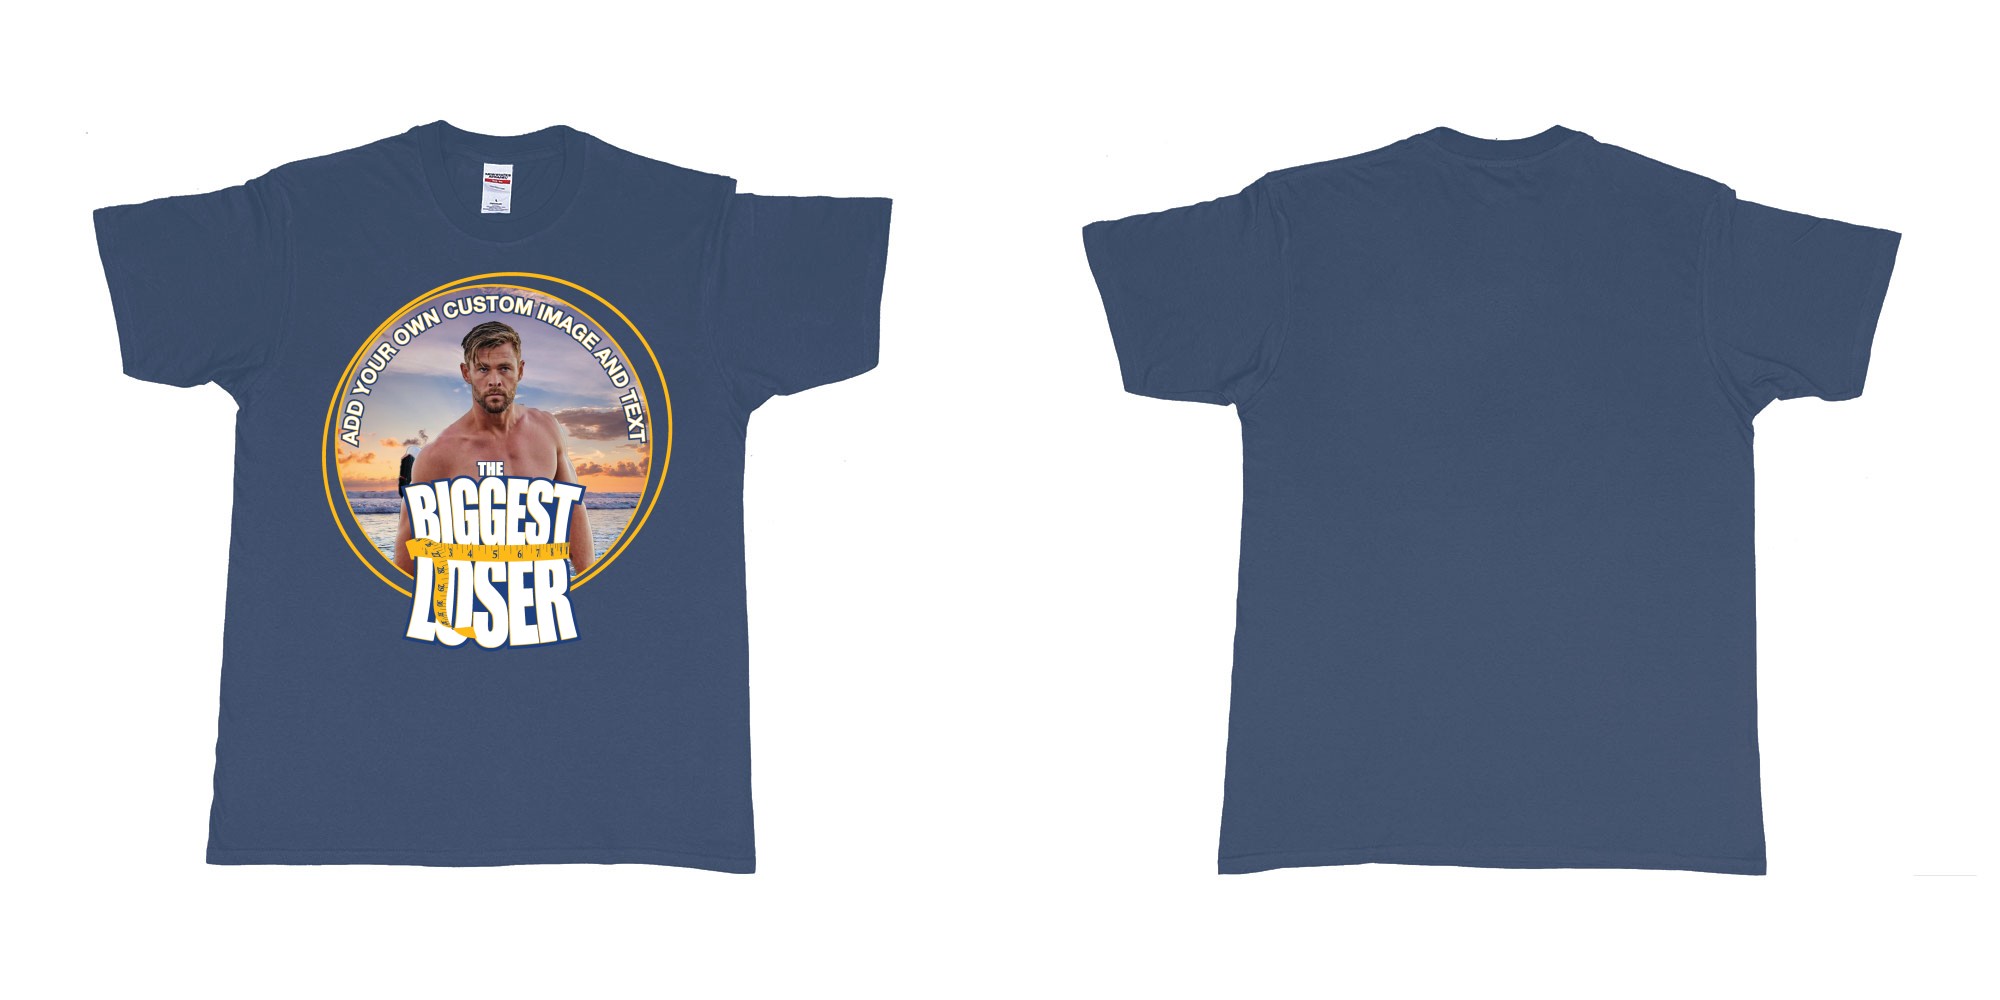 Custom tshirt design the biggest loser logo custom image funny tshirt design in fabric color navy choice your own text made in Bali by The Pirate Way